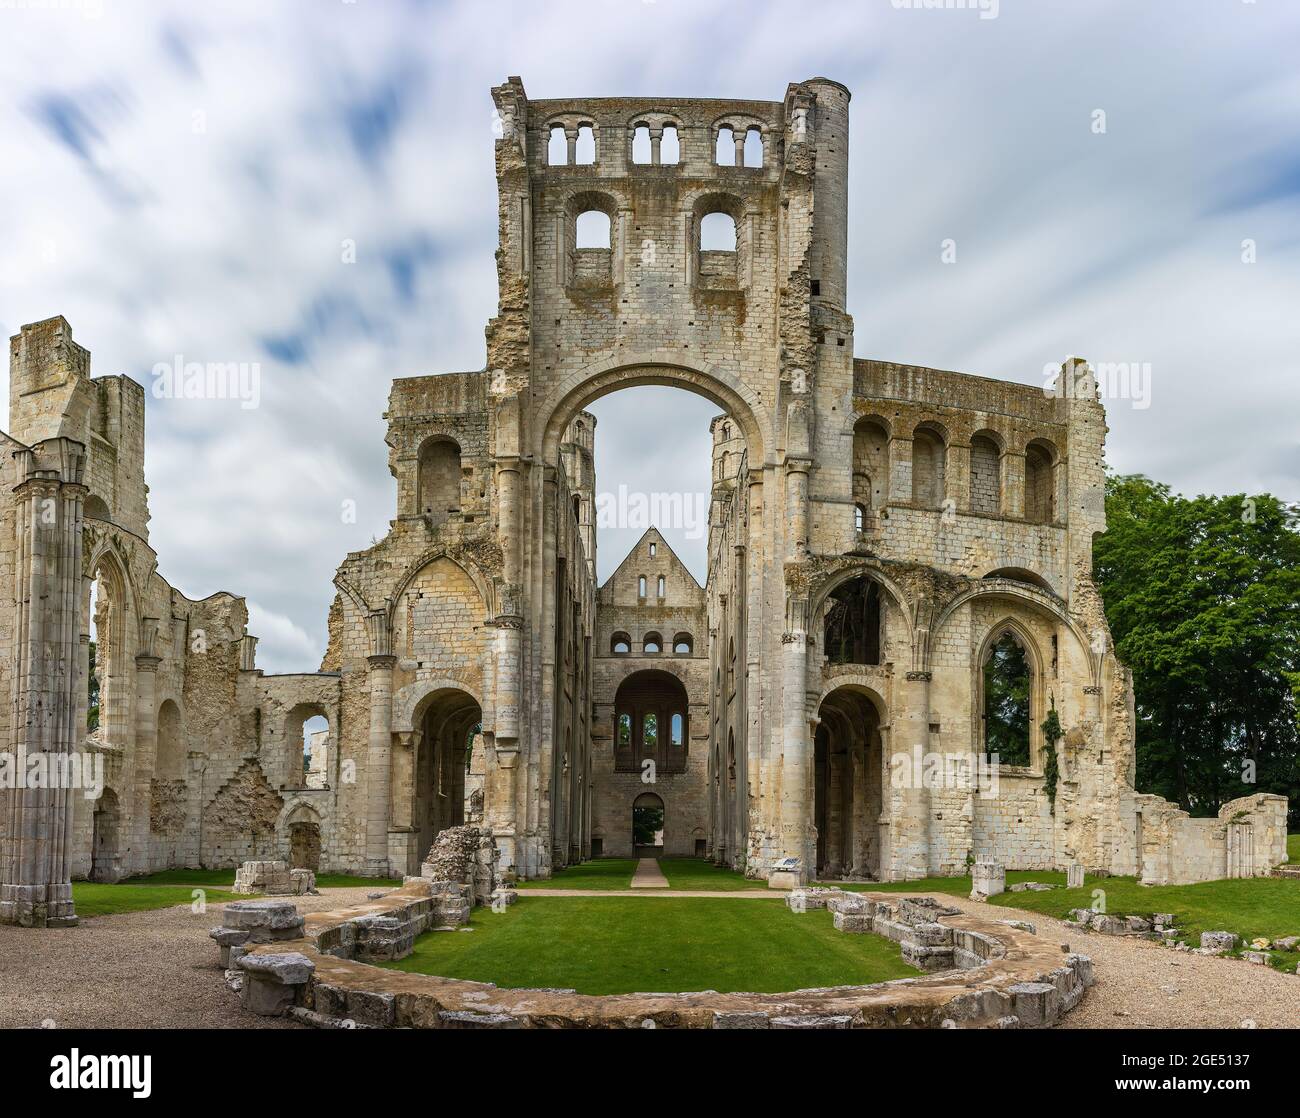 Ruin of medieval benedictine abbey and church of Jumieges in France, Normandy Stock Photo